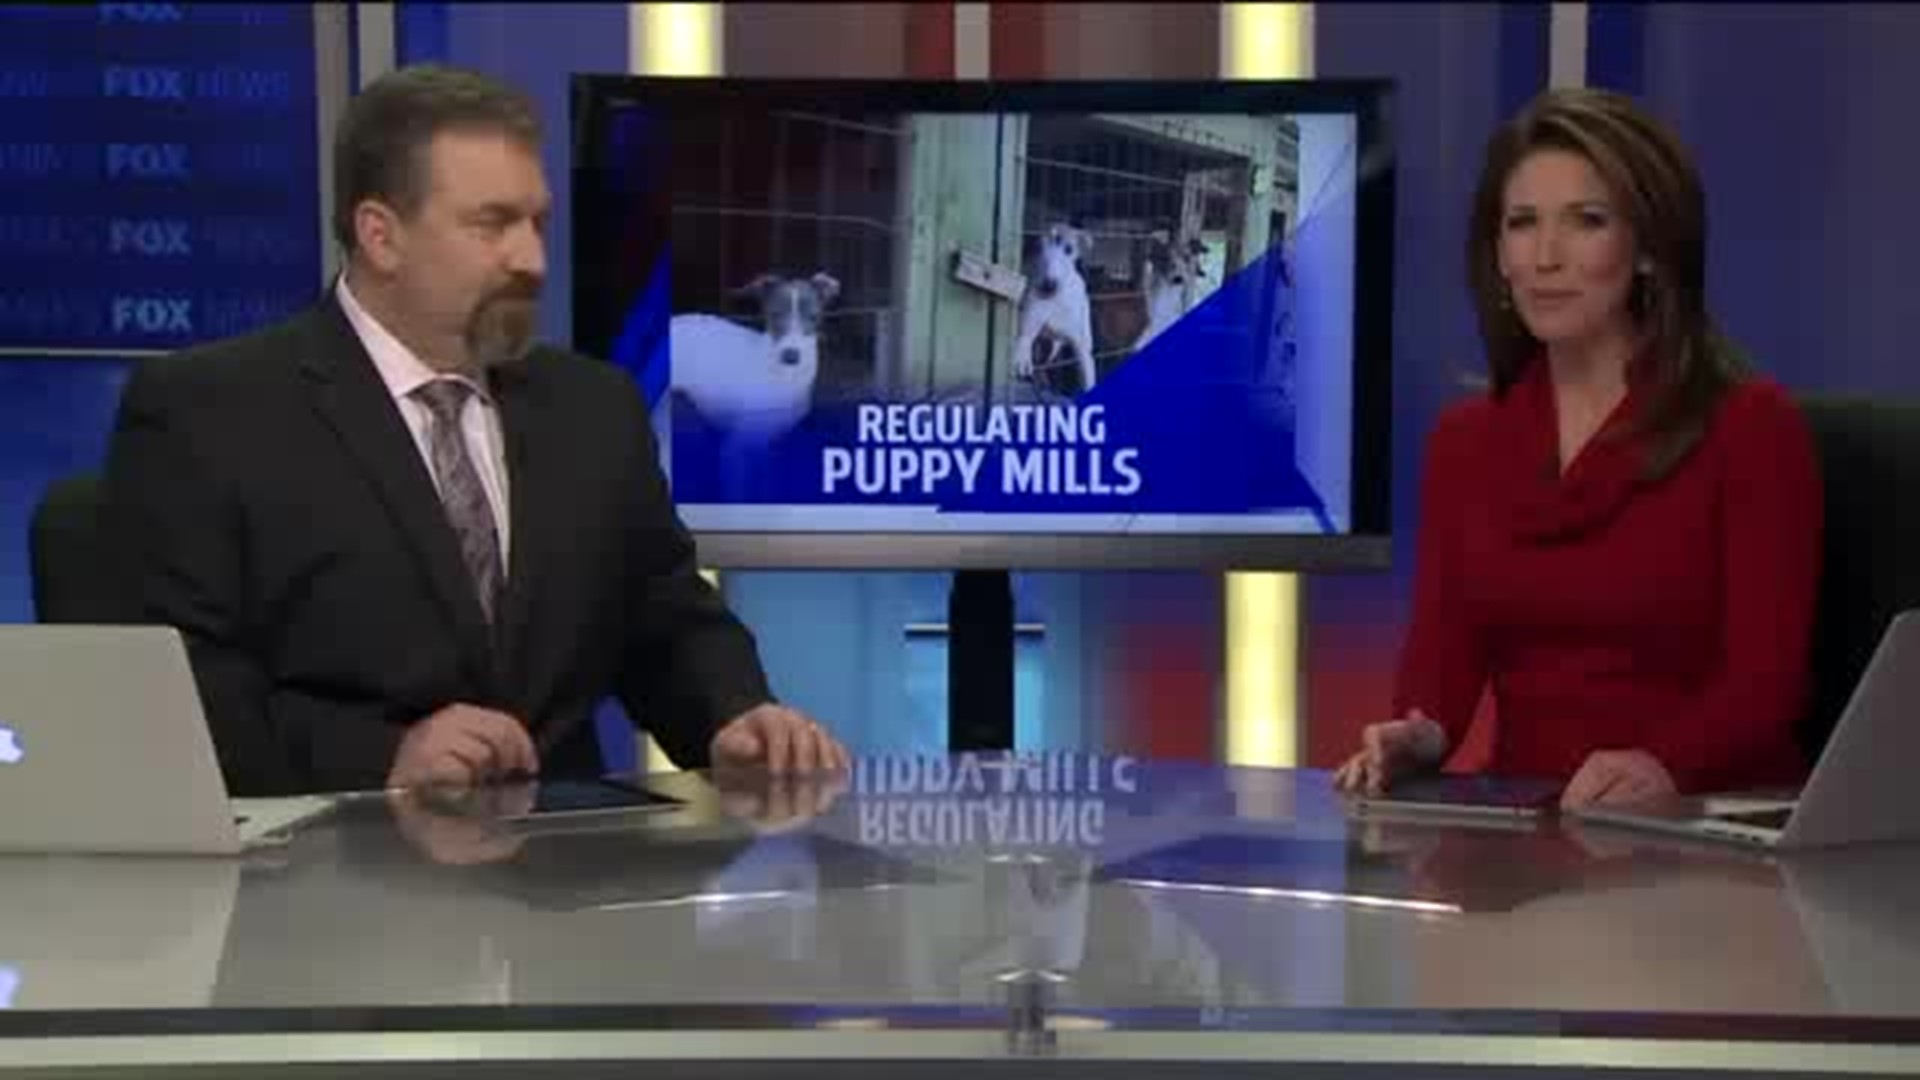 “Dog Law” battles puppy mill issue in Lancaster County